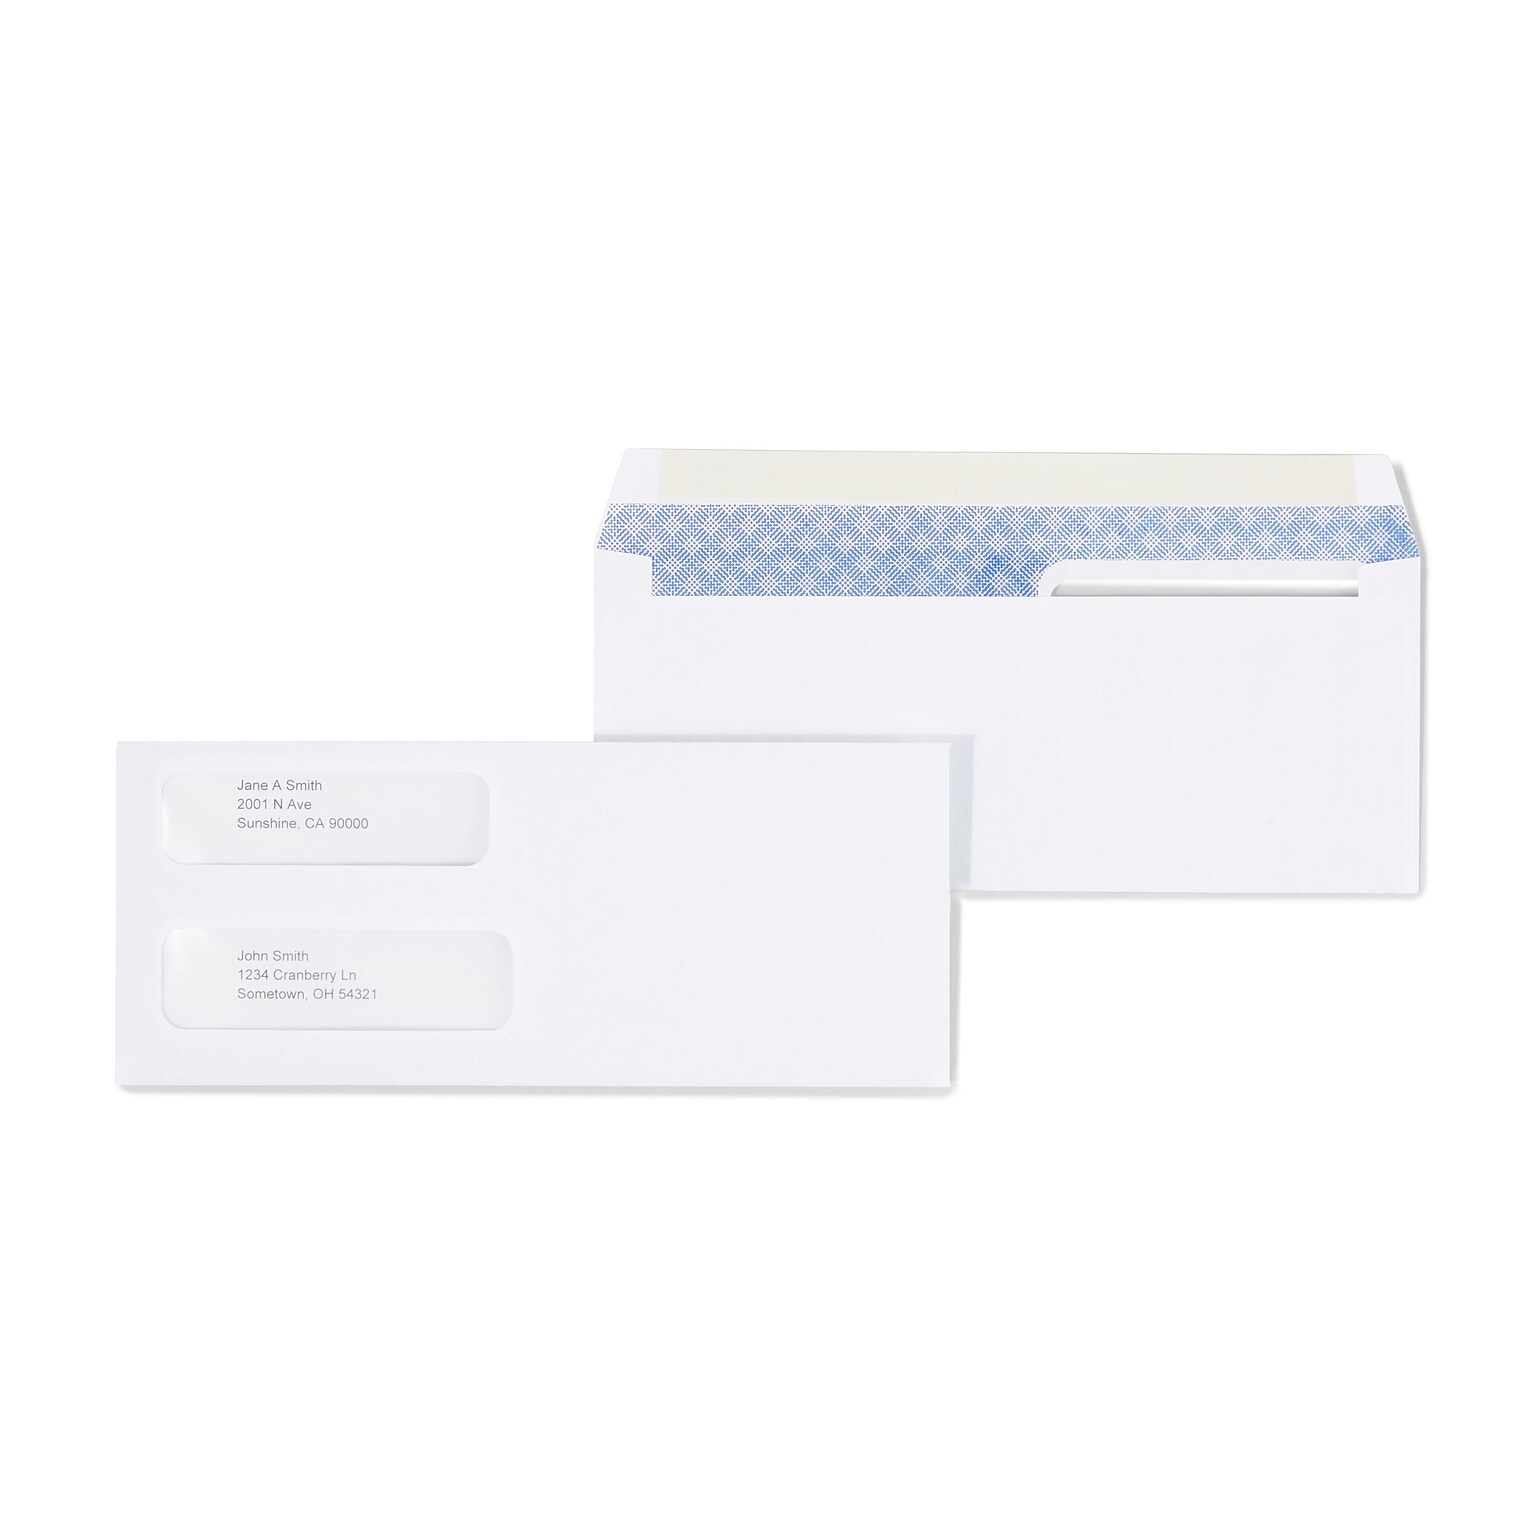 Staples Laser Check Gummed Security Tinted #9 Double-Window Envelopes, 3 5/8 x 8 7/8, Wove White, 500/Box (394062/19045)